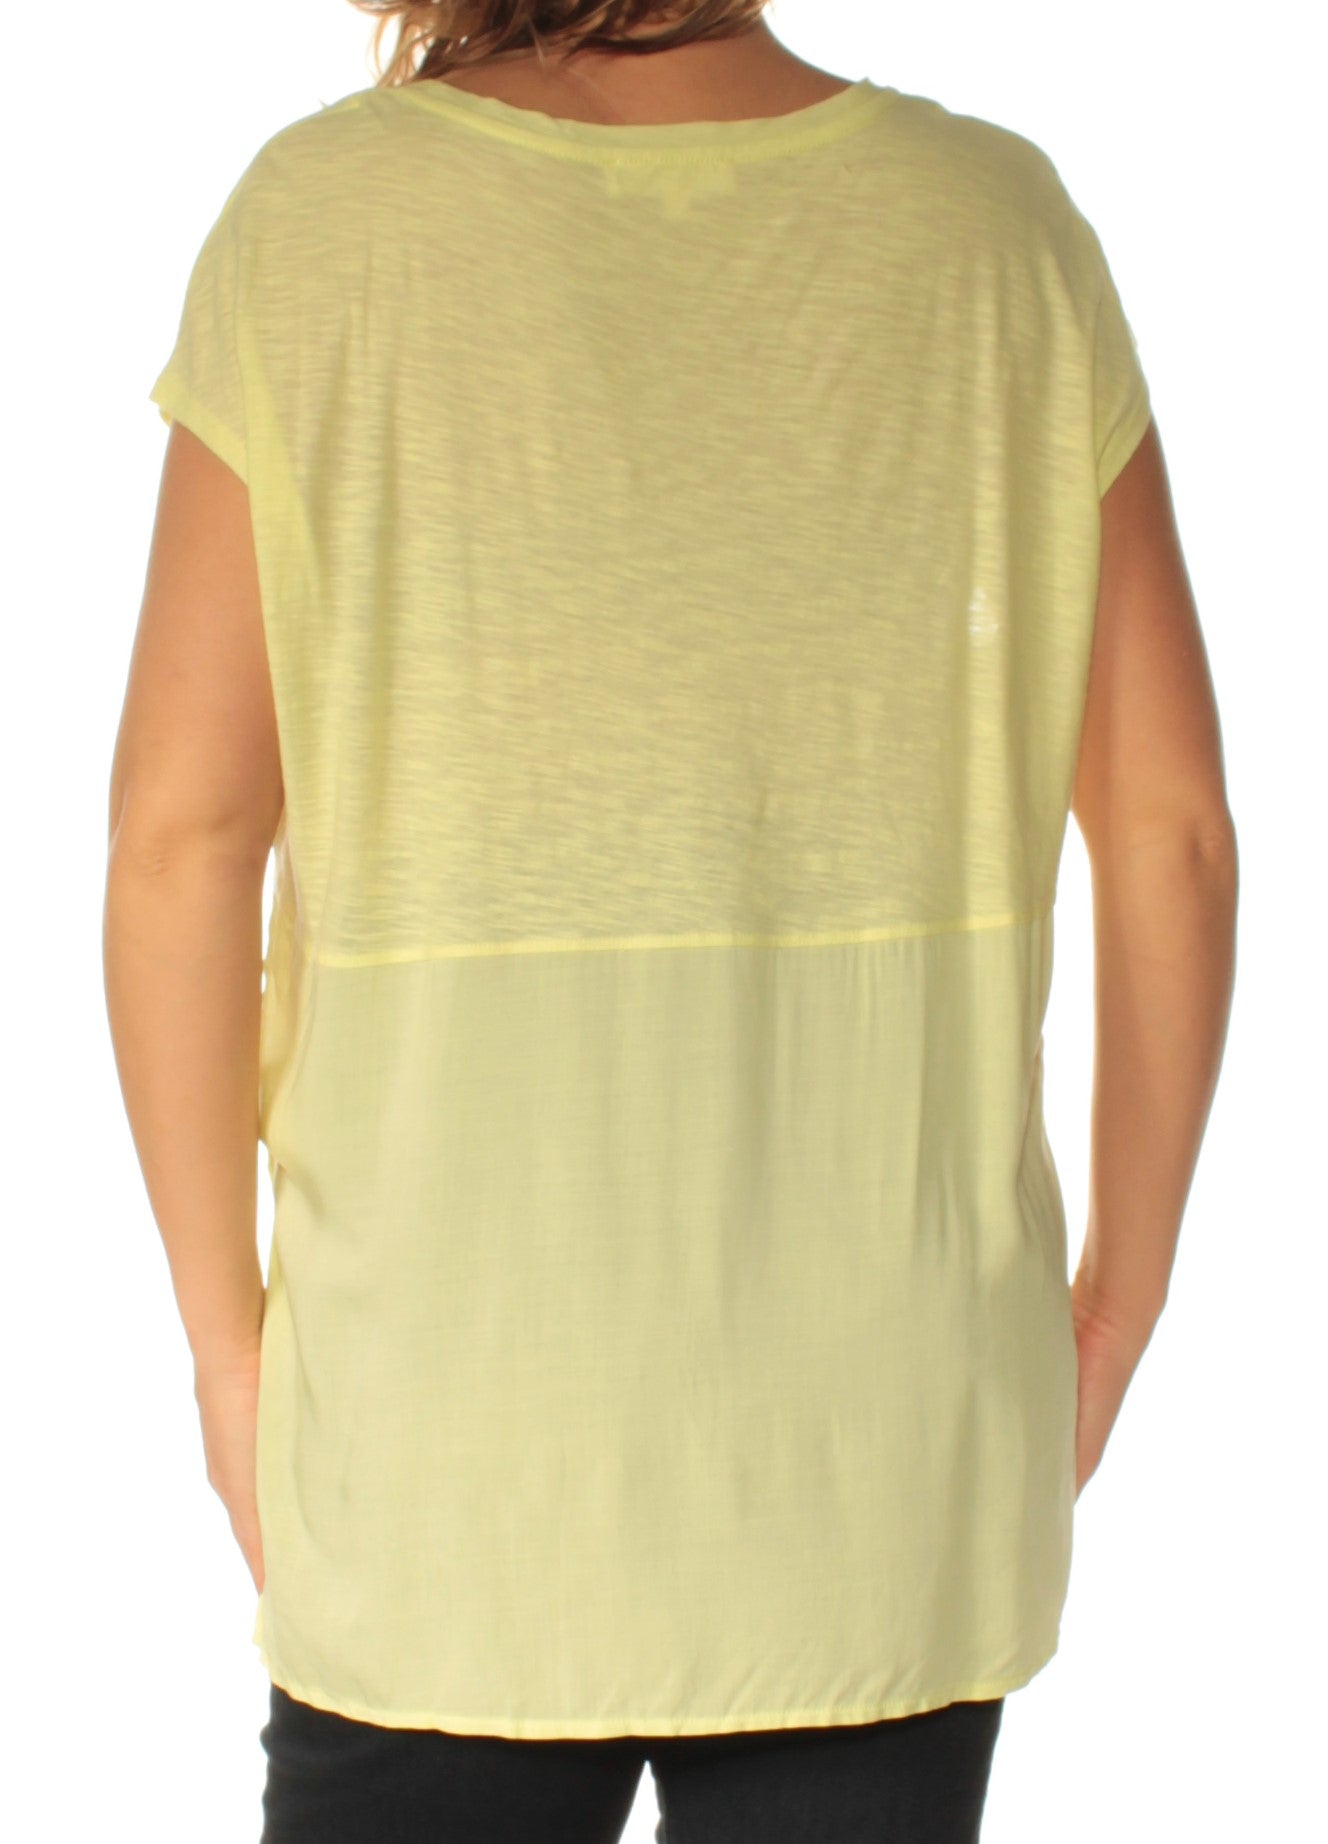 VINCE CAMUTO Womens Yellow Cap Sleeve Boat Neck Top